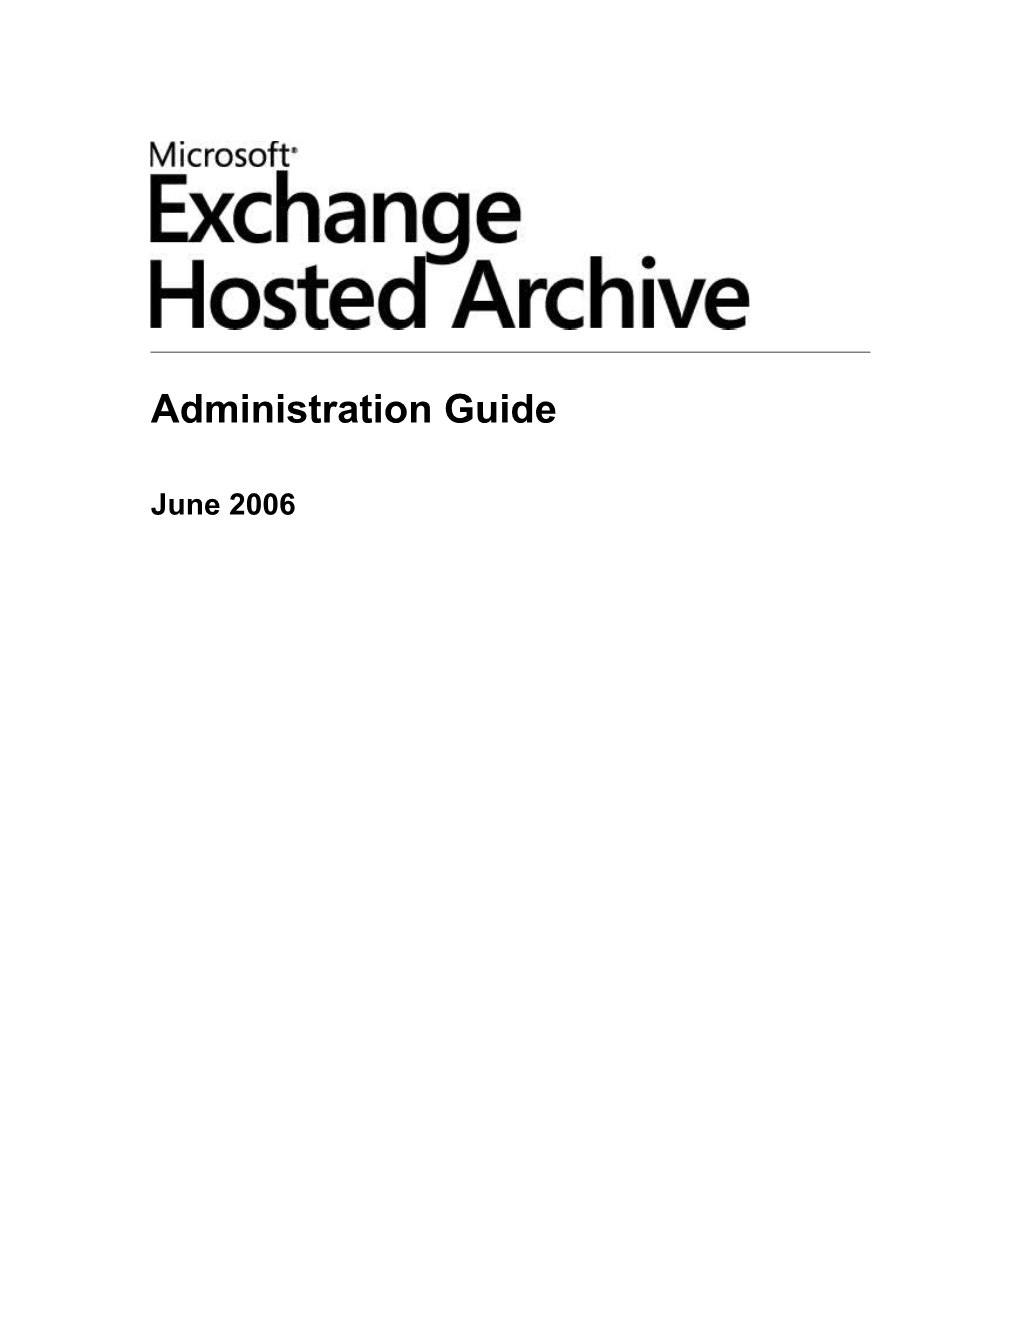 Microsoft Exchange Hosted Archive Administration Guide